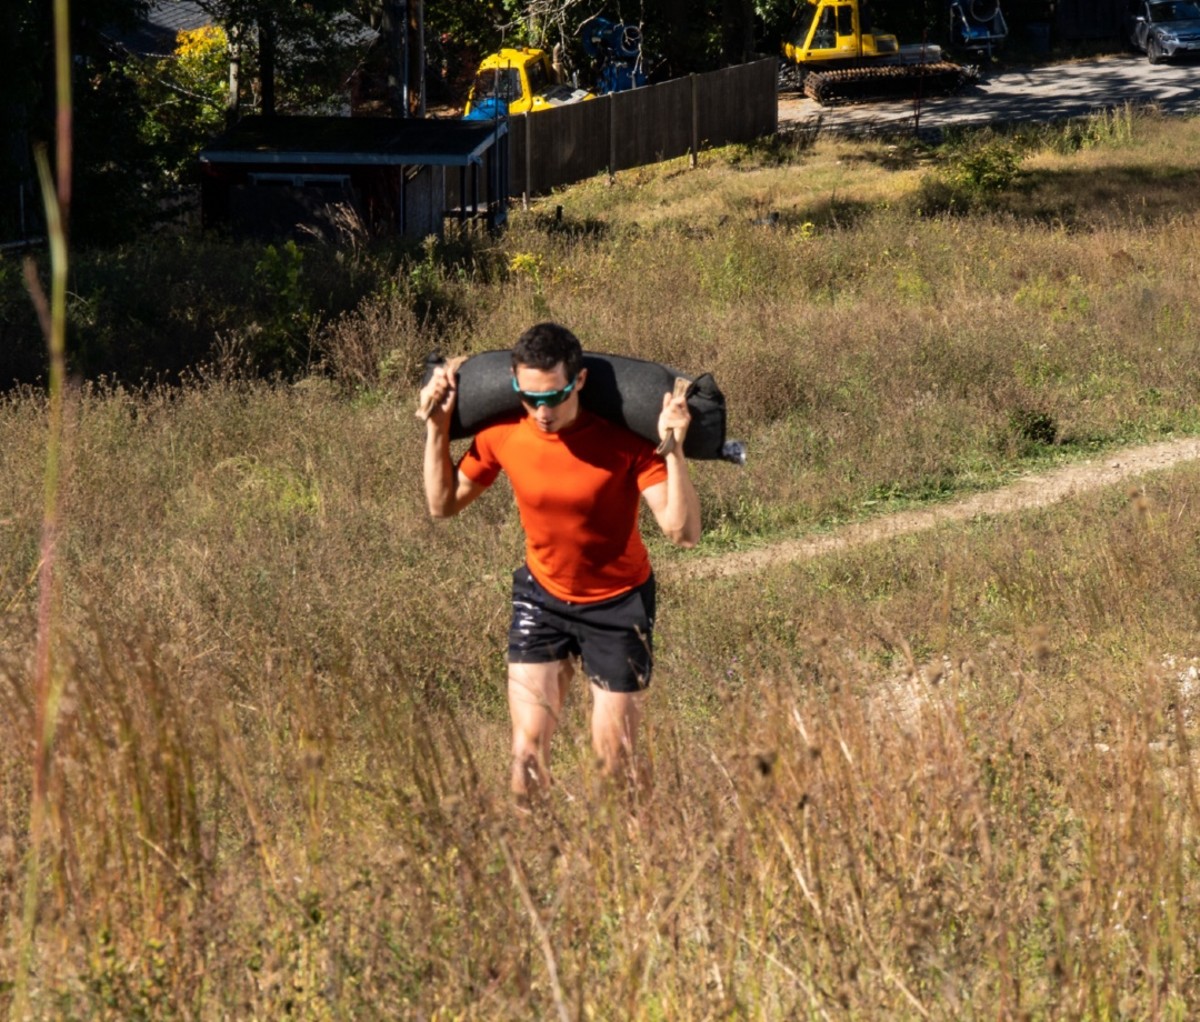 OCR athlete Ryan Kempson doing weighted hill run with sandbag on shoulders